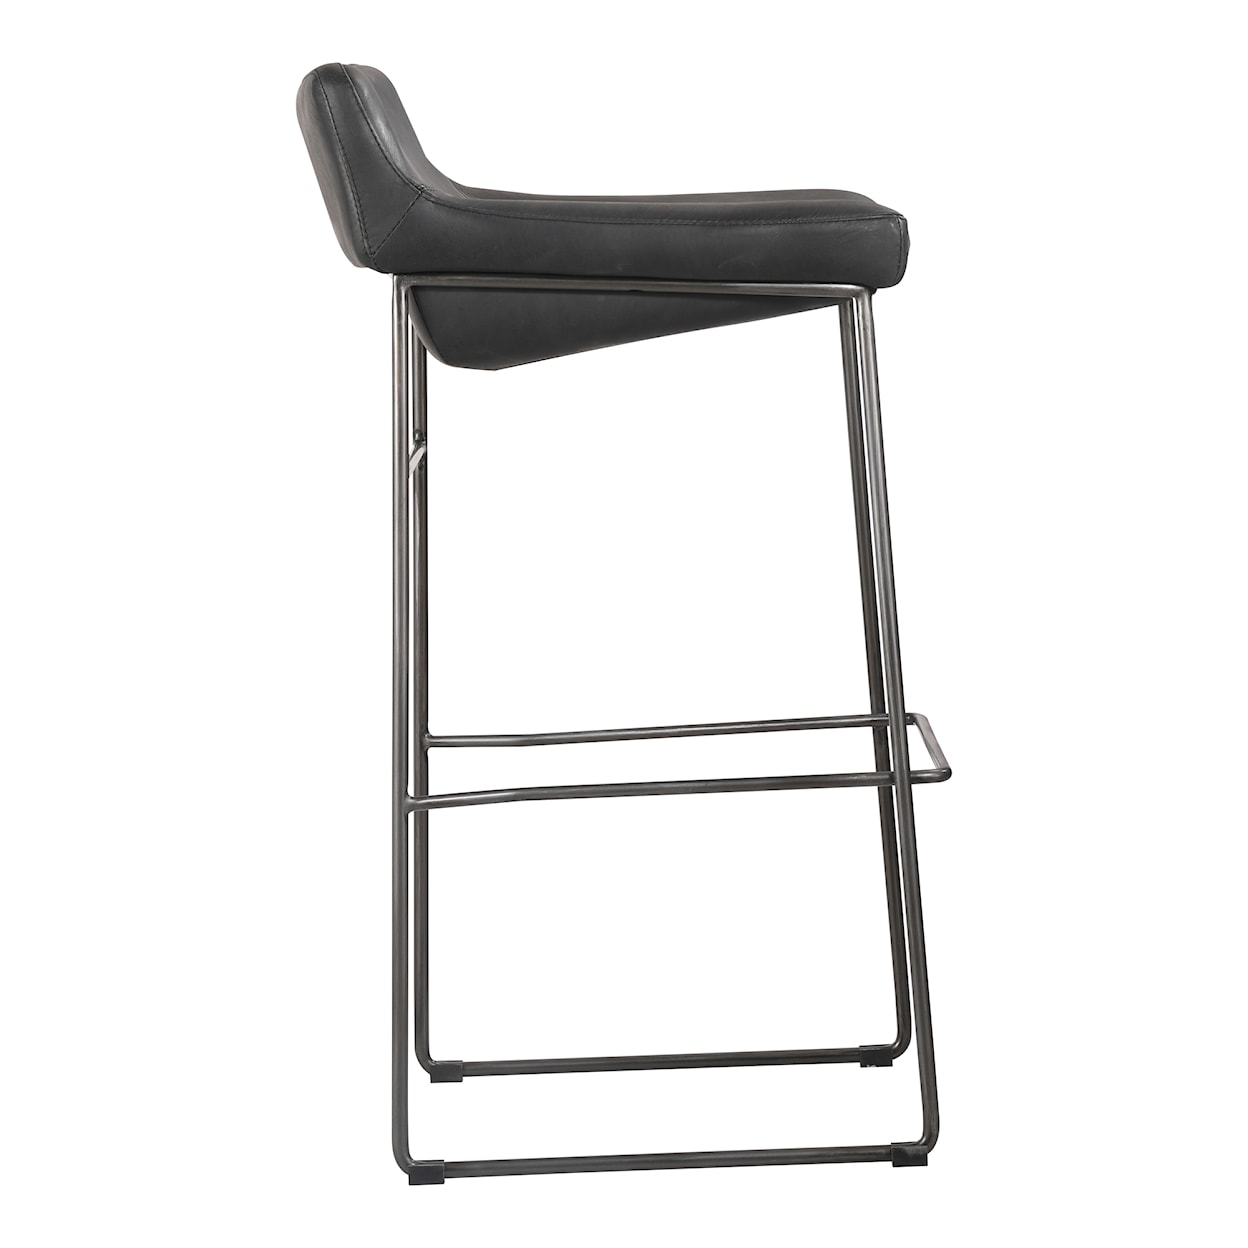 Moe's Home Collection Starlet Starlet Barstool Onyx Black Leather -M2